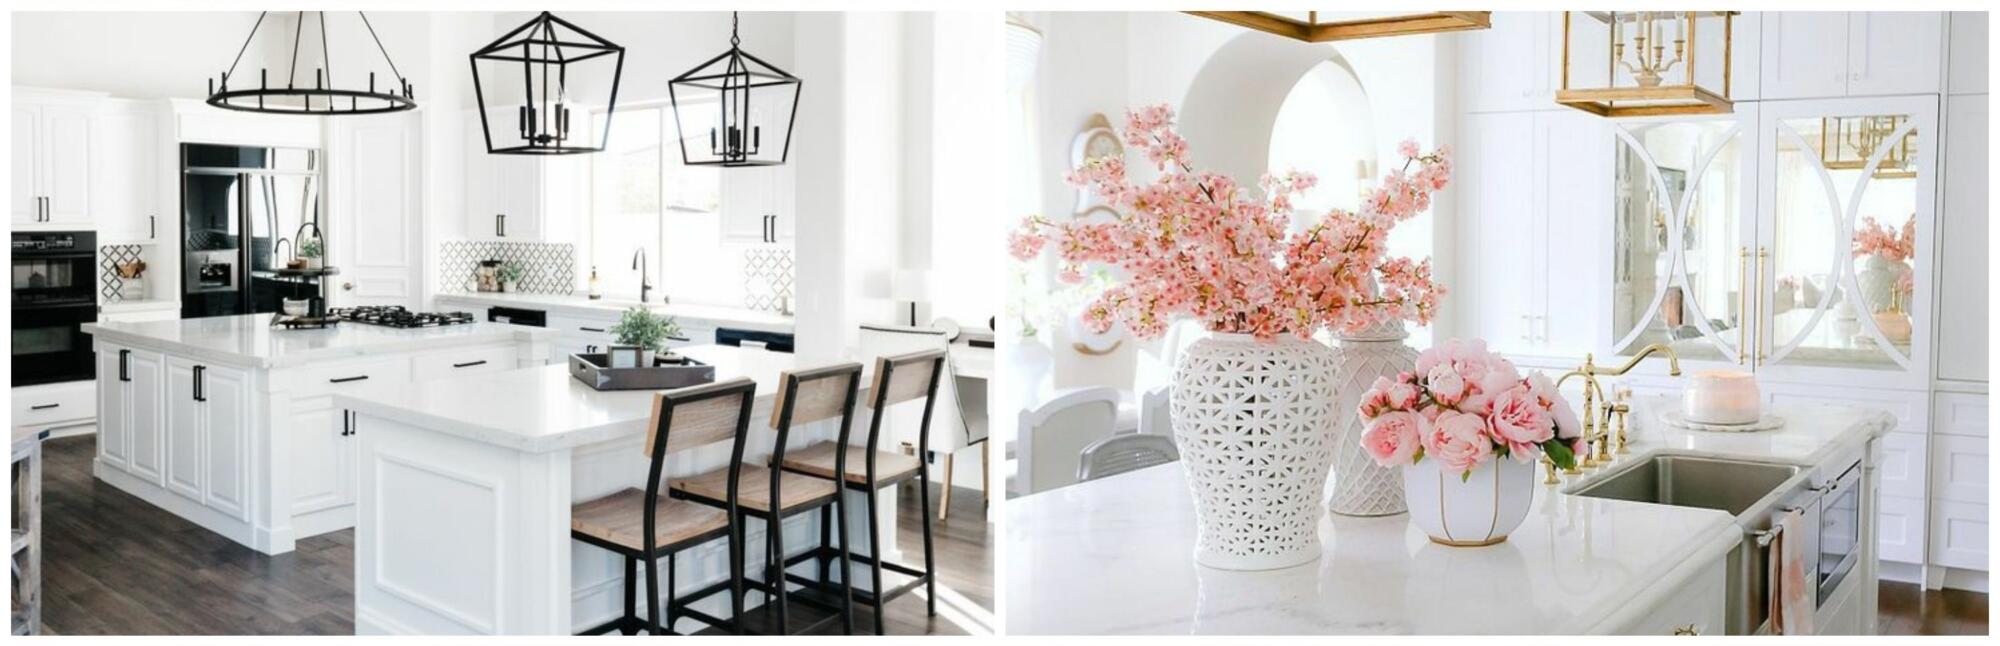 A white kitchen adorned with pink flowers and a chandelier, showcasing creative ideas for a bright space.